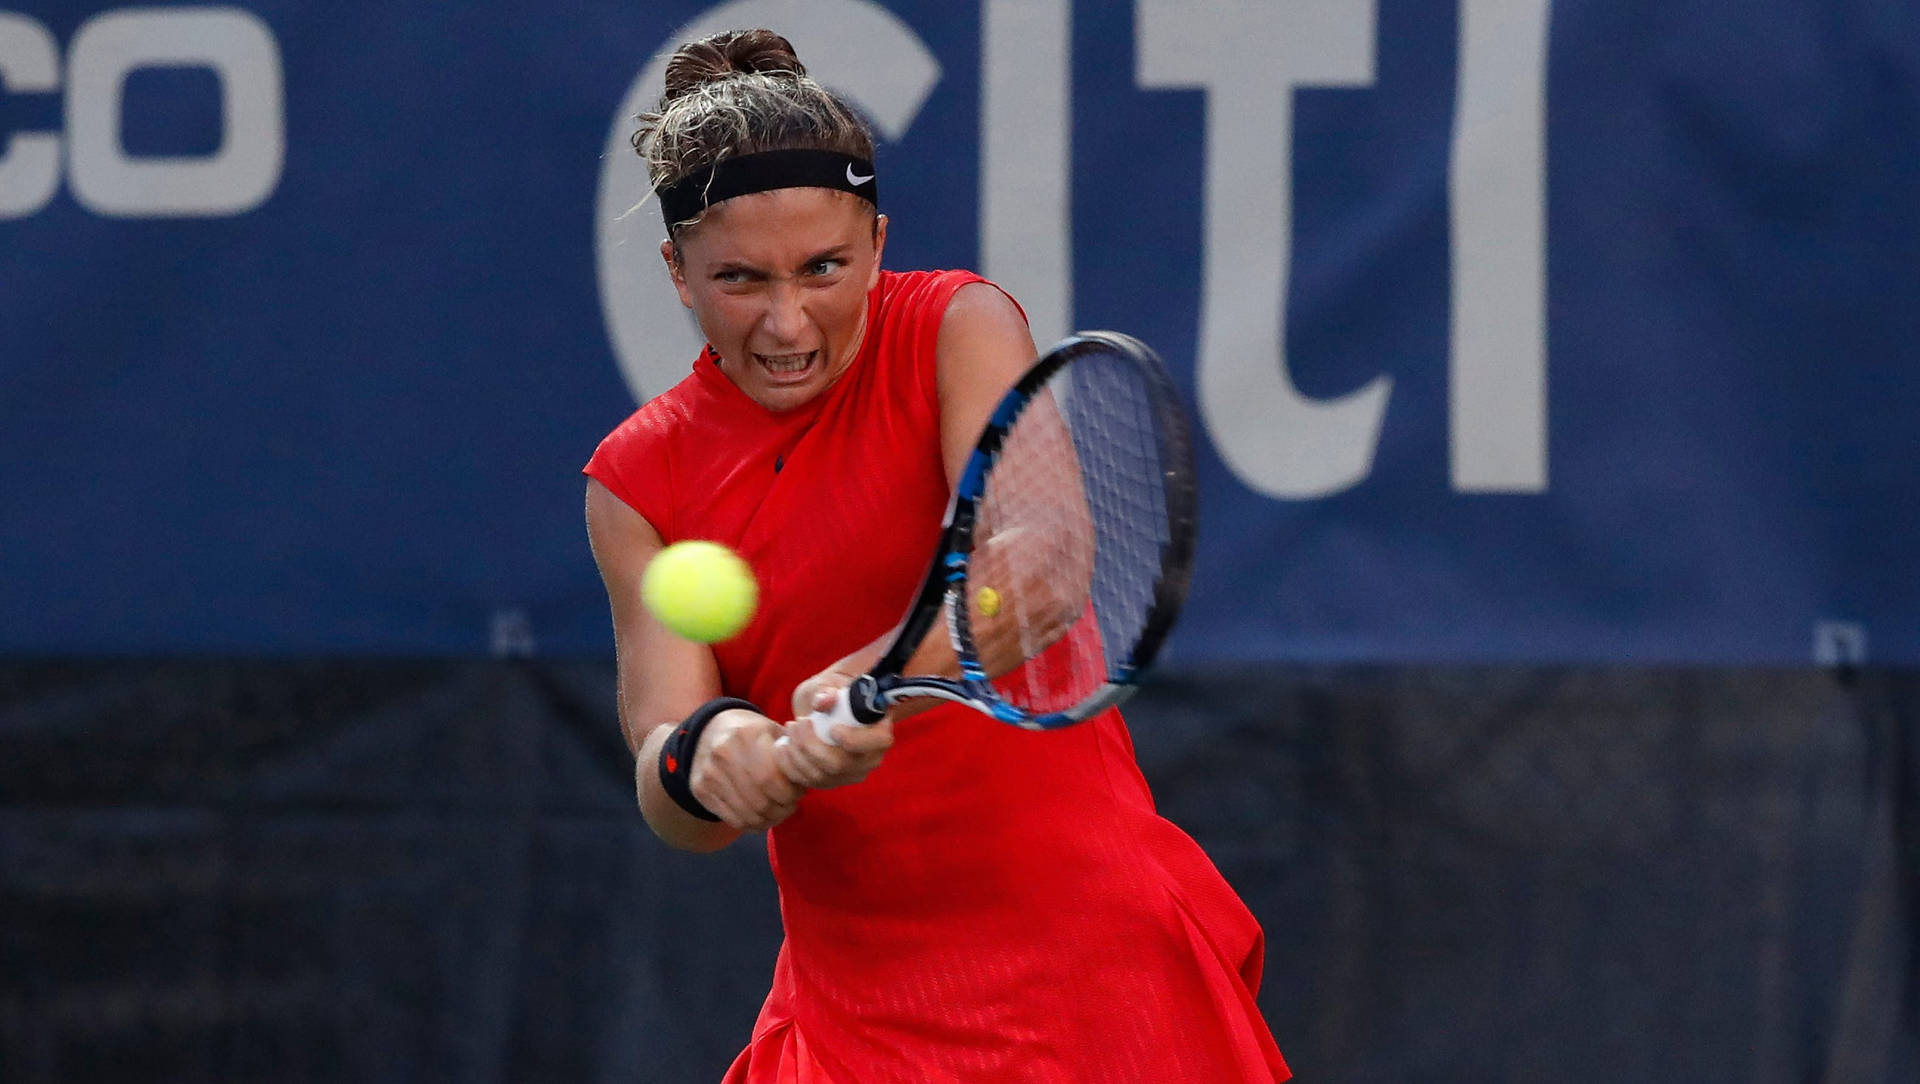 Saraerrani Spirited Facial Expression Would Be Translated To 